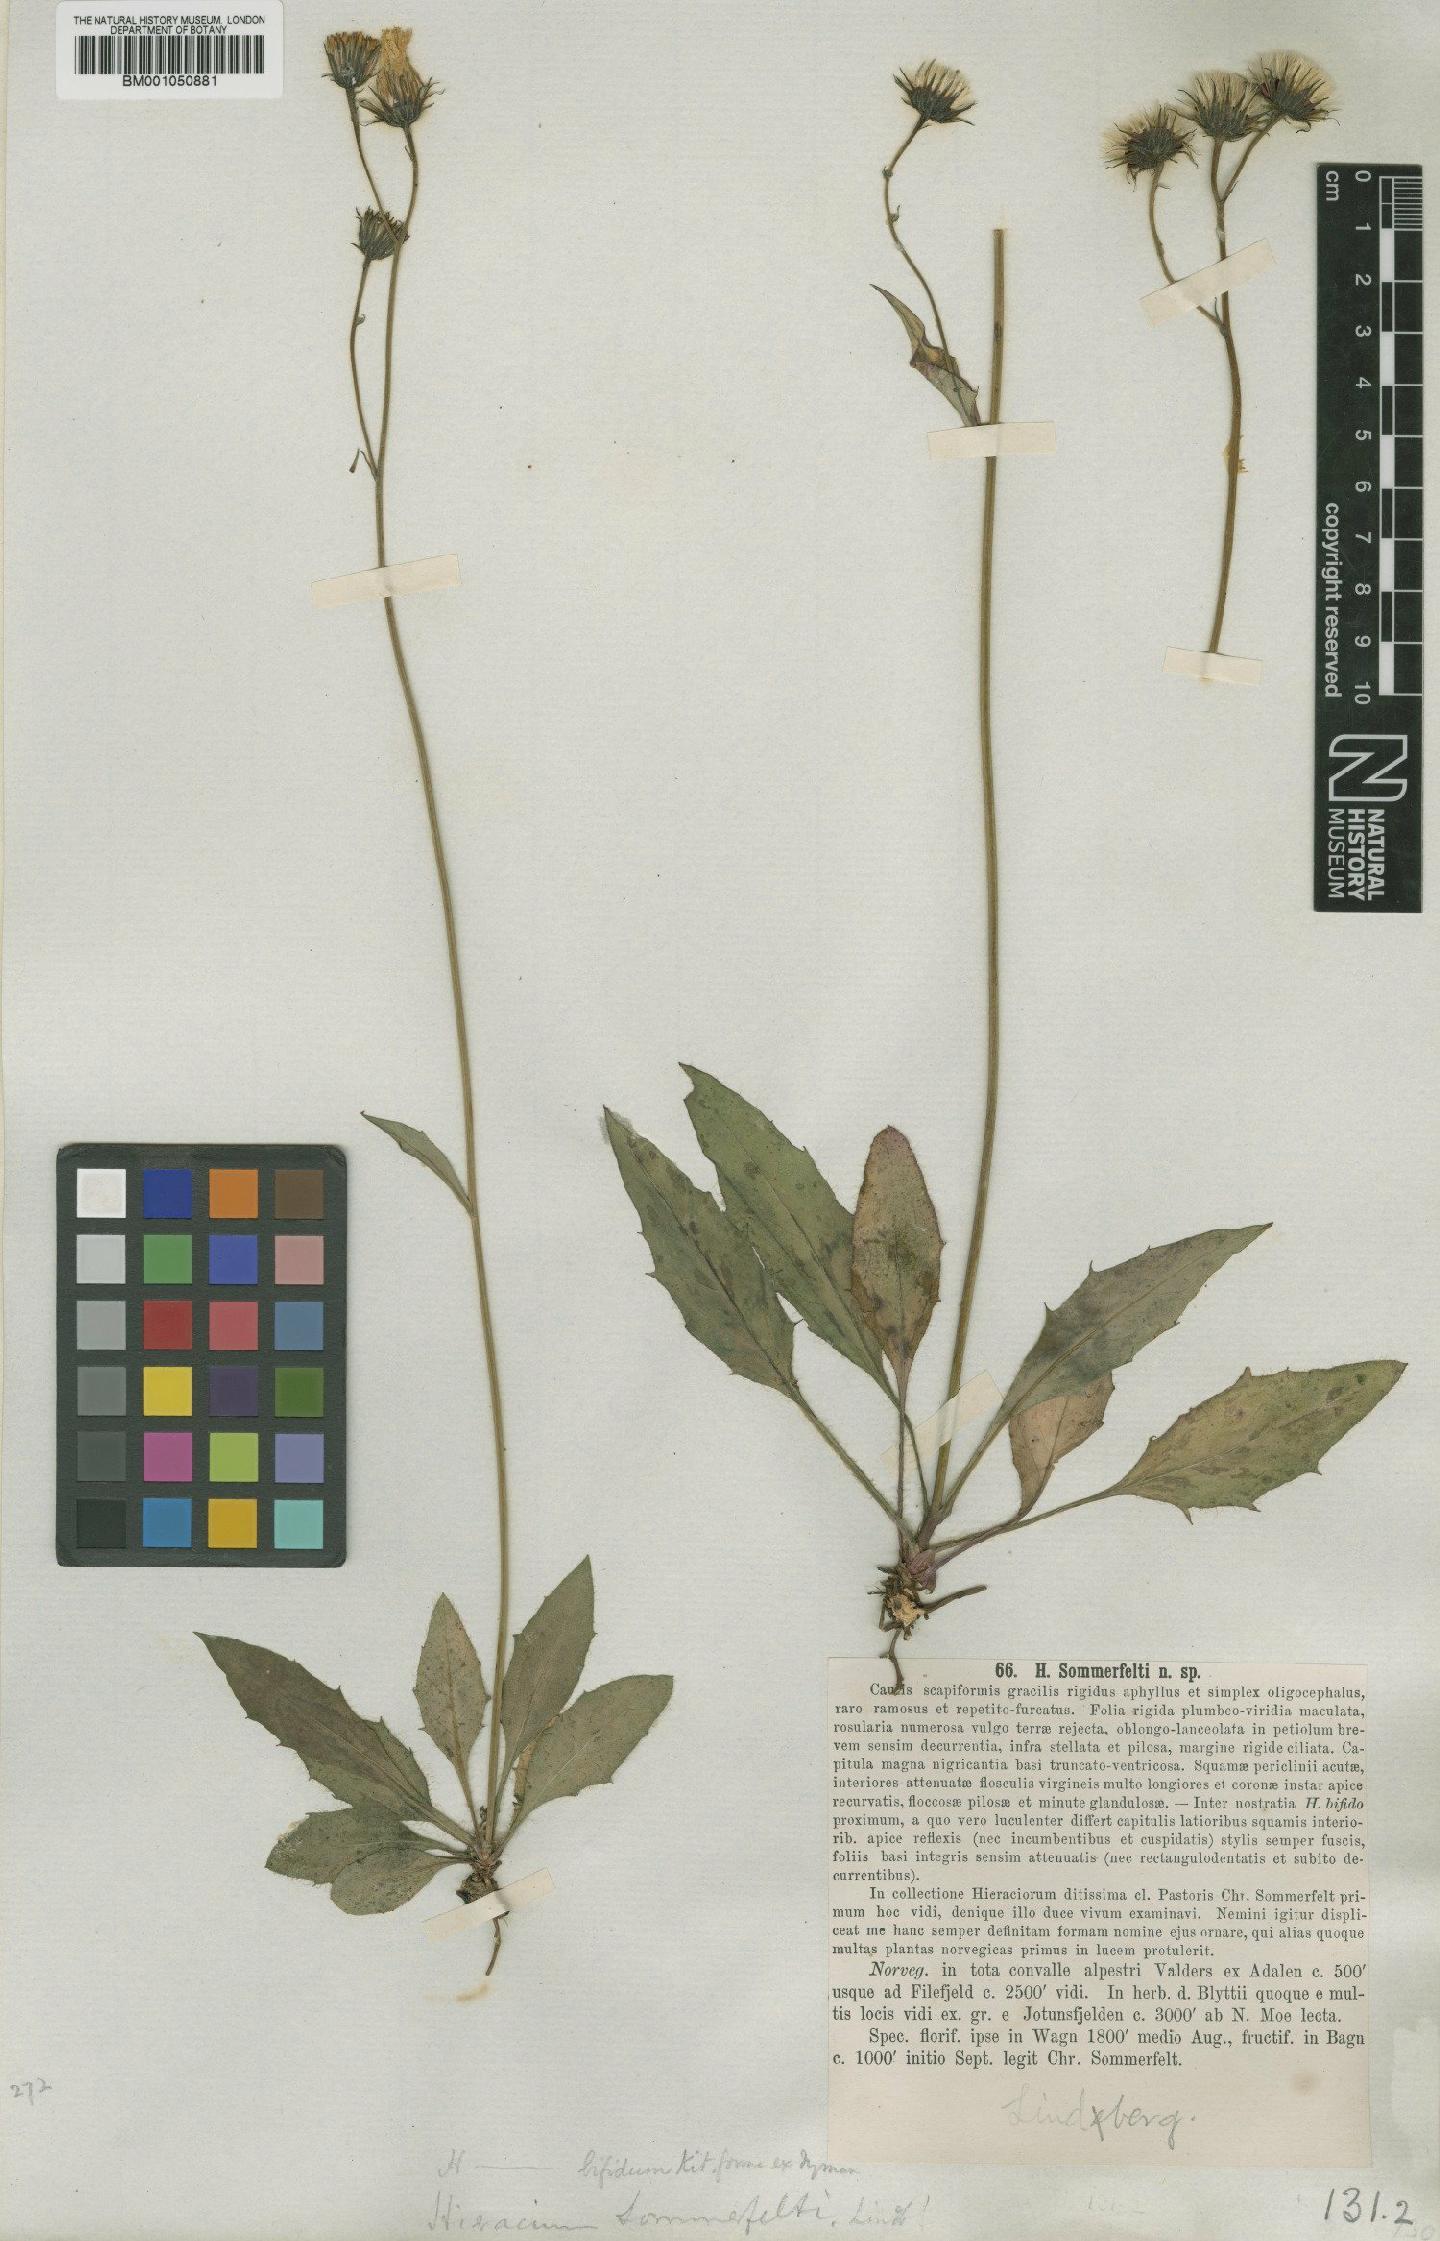 To NHMUK collection (Hieracium sommerfeltii Lindeb; TYPE; NHMUK:ecatalogue:2400177)